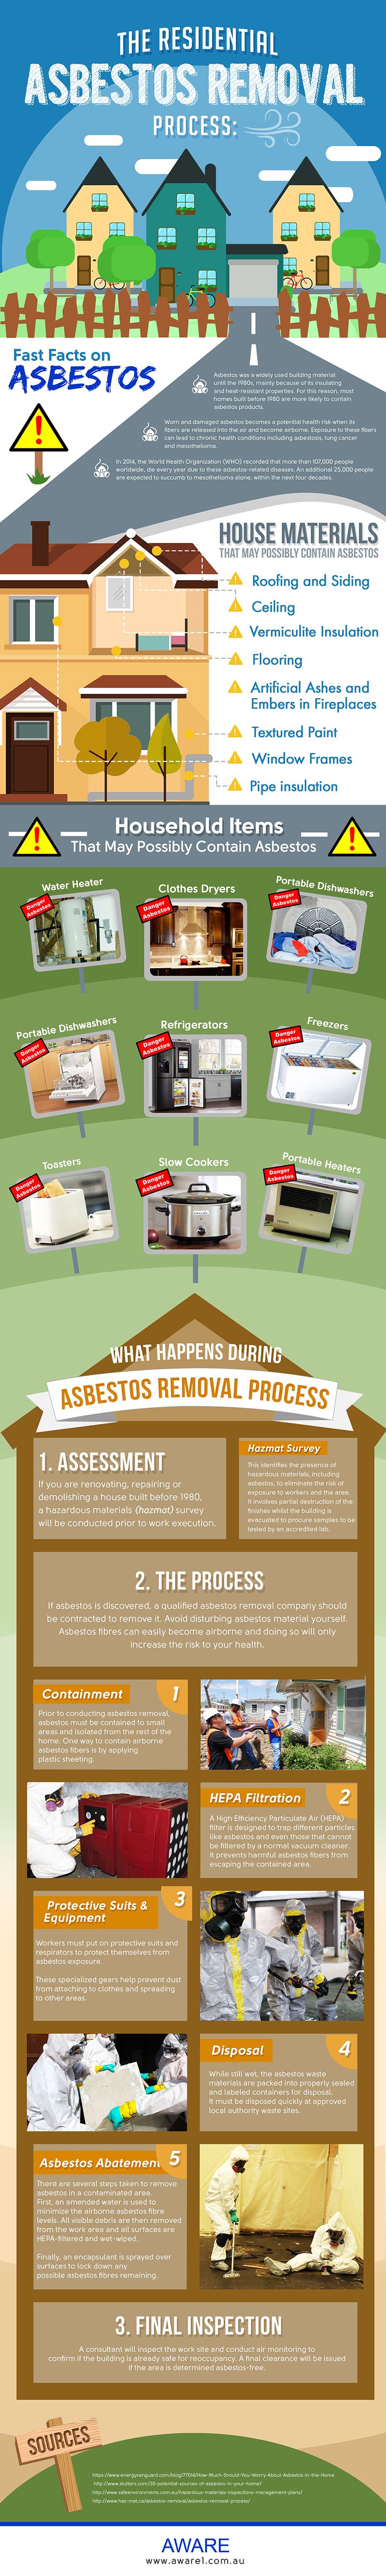 Wise Global Training Ltd | Residential Asbestos Removal Process